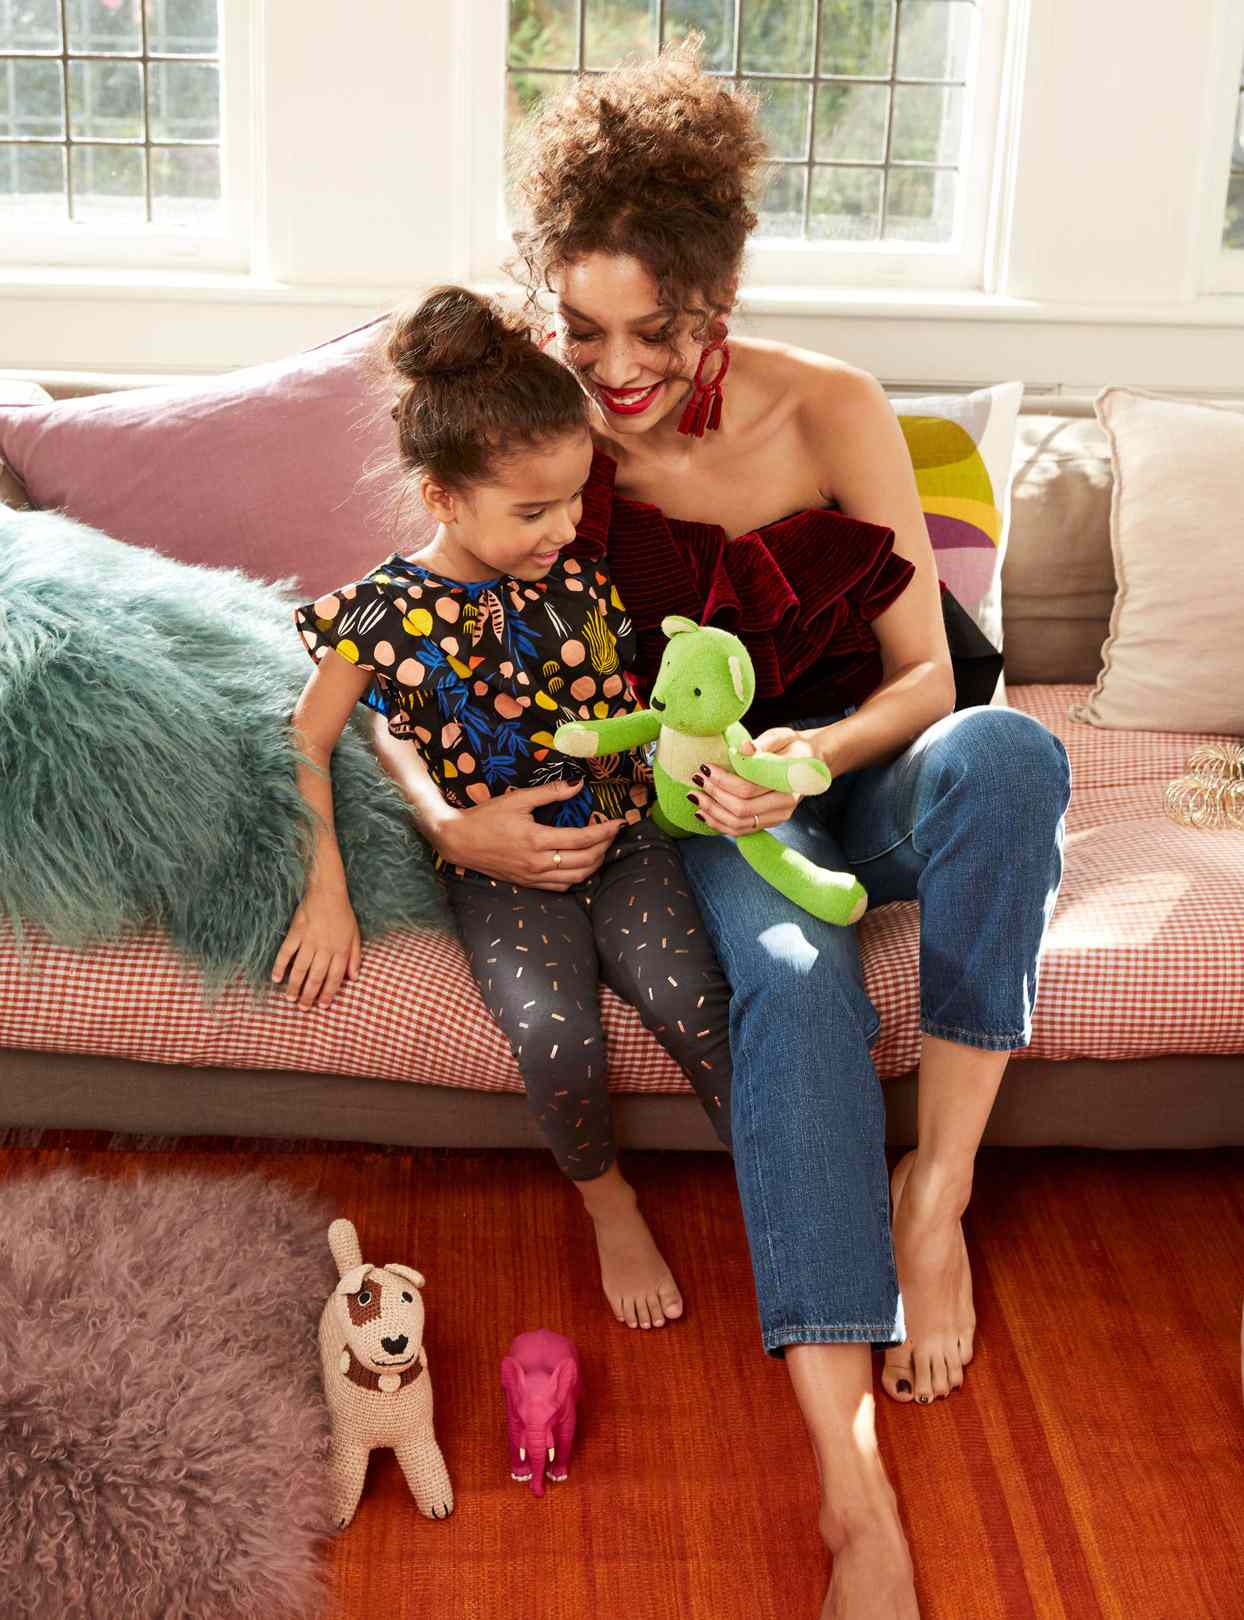 woman on couch with little girl and stuffed animal